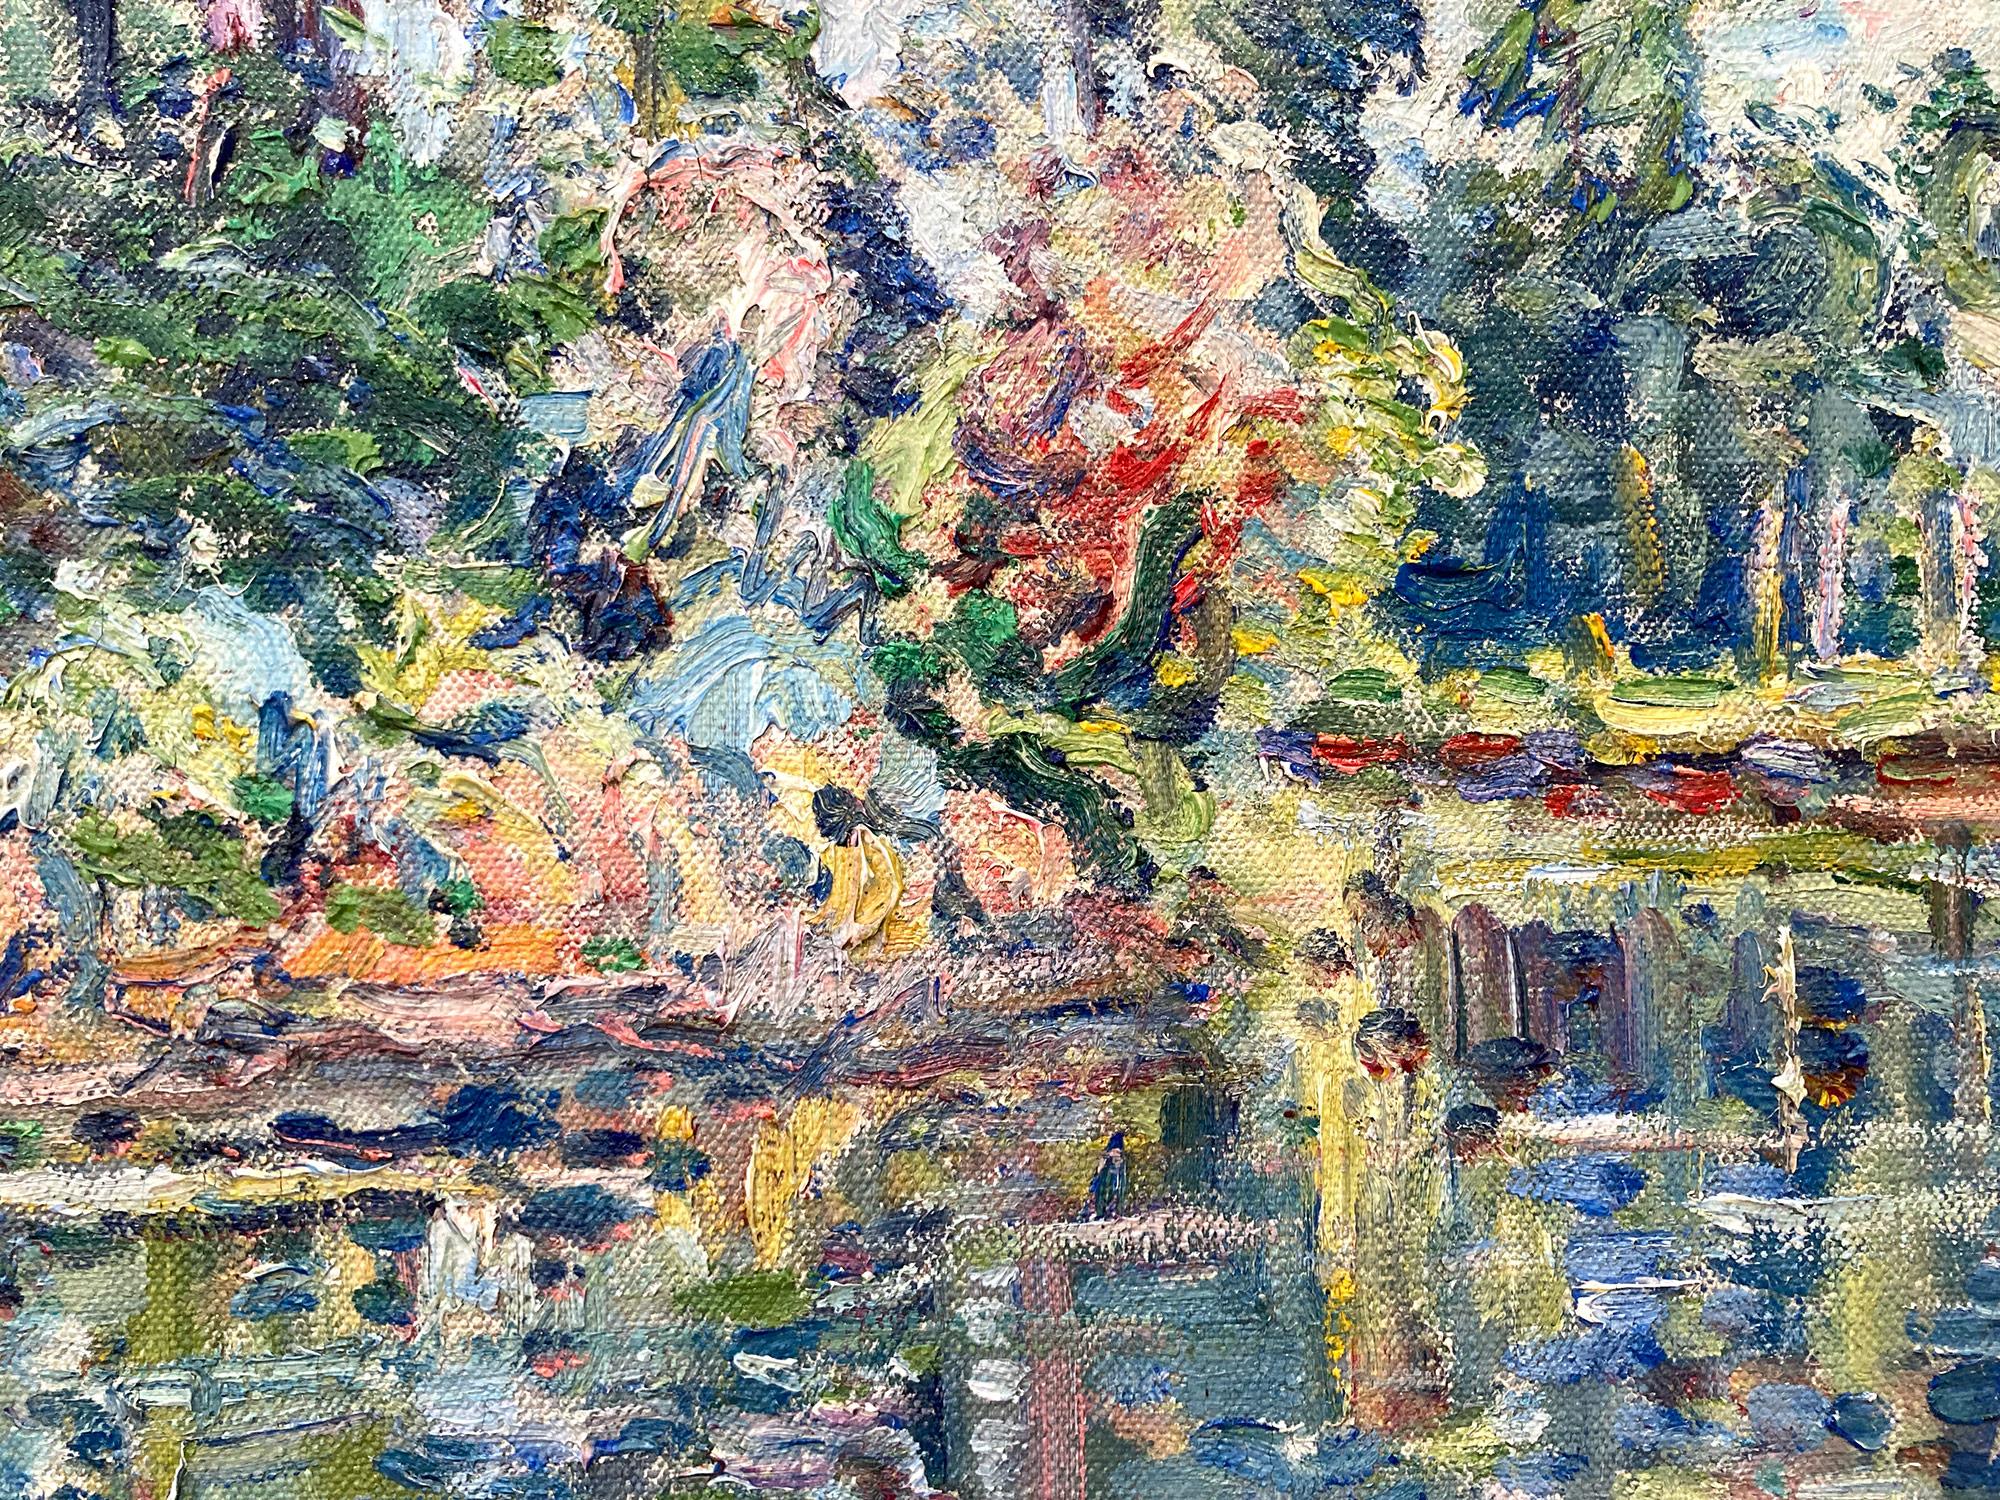 This piece is a pertinent example of Charles Genge most sought after works, depicting a colorful view of the river. As a British Post Impressionist artist, most of Genge's works were produced in the Early 20th Century, between 1900- 1920, with this